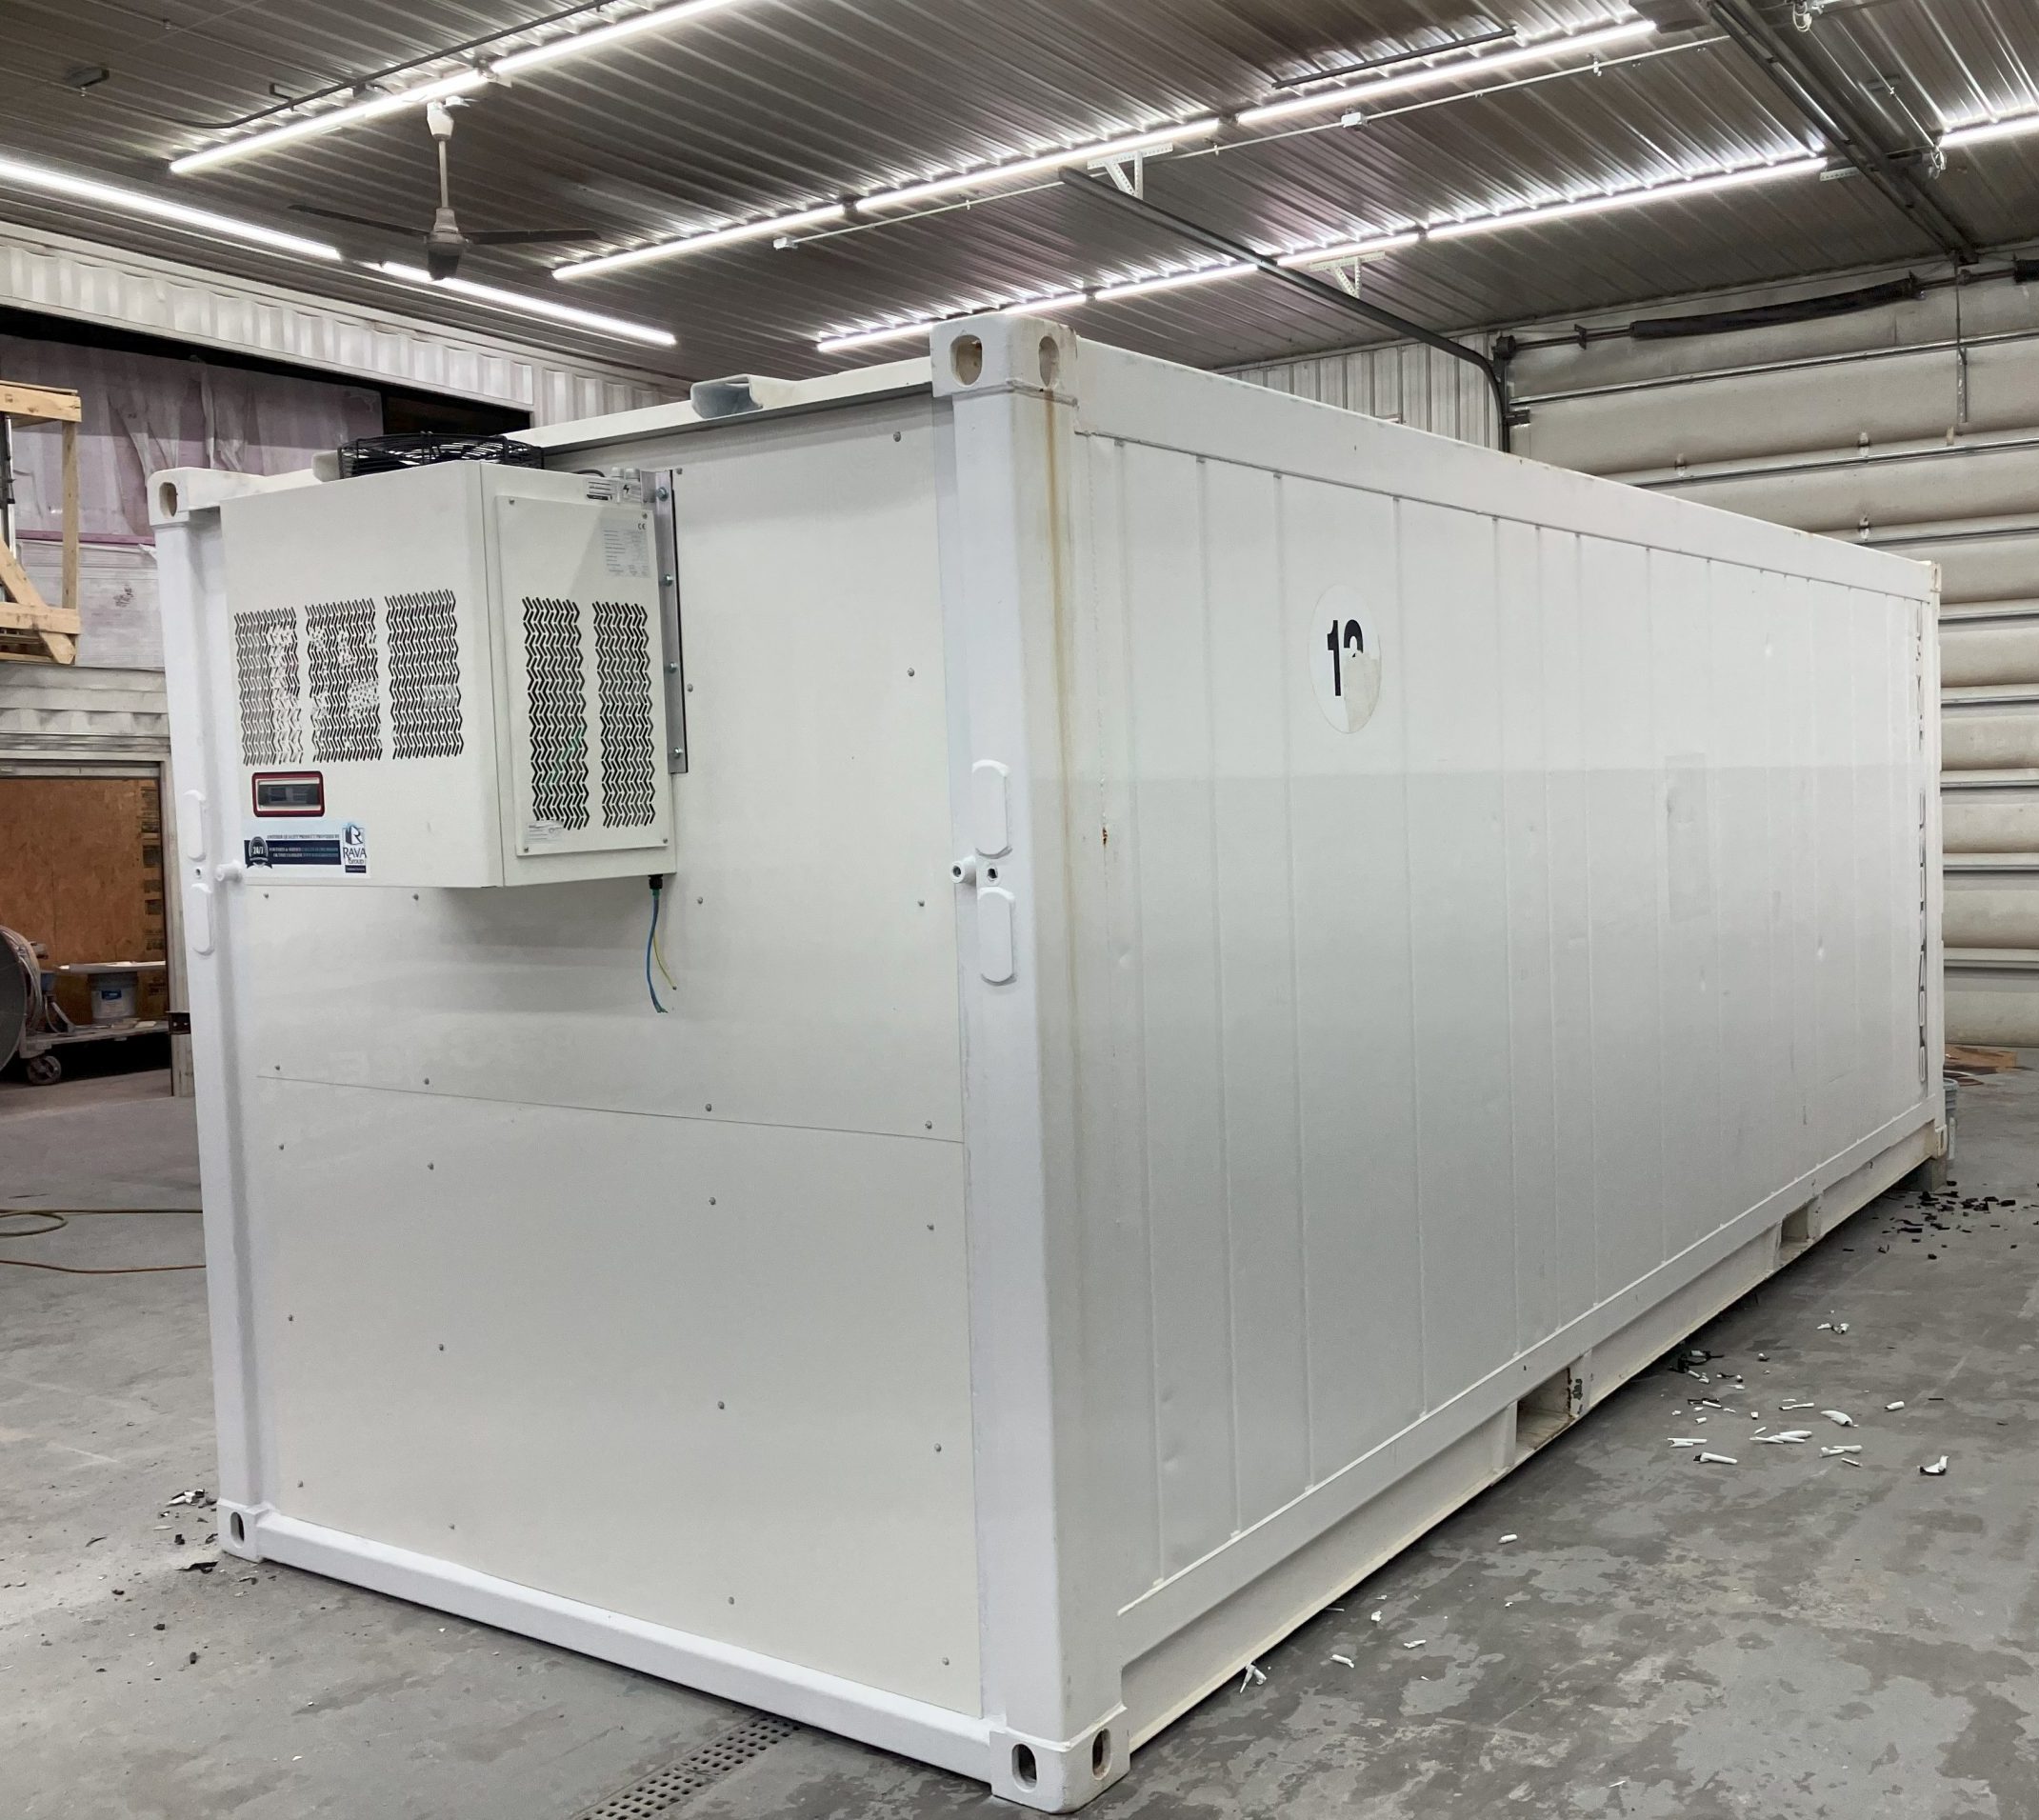 Newly refurbished Refrigerated Containers in New Hampshire, ready to be sold and rented by USA-Containers